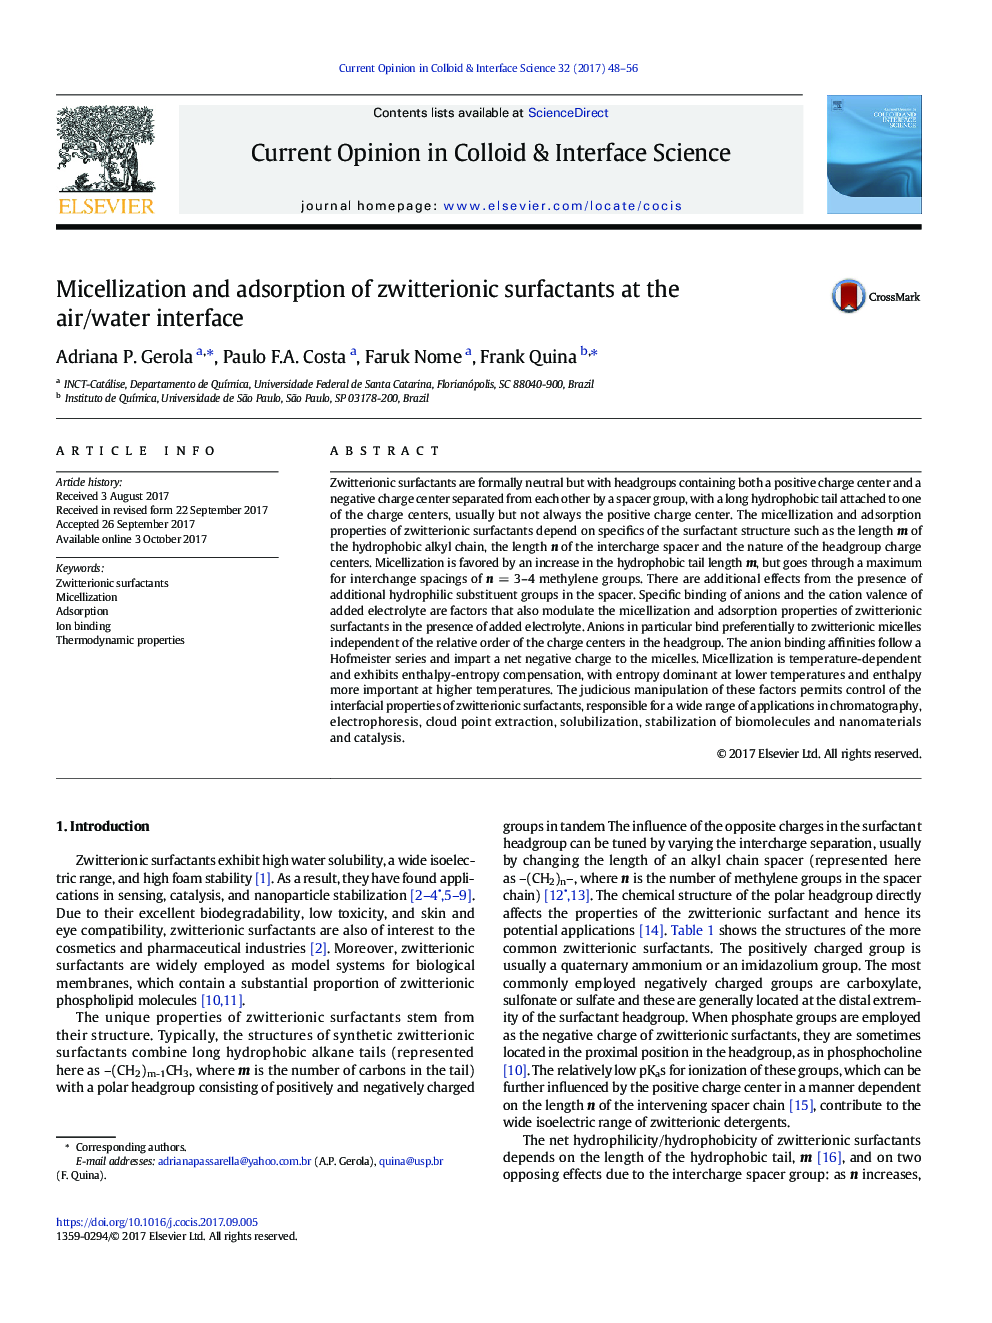 Micellization and adsorption of zwitterionic surfactants at the air/water interface